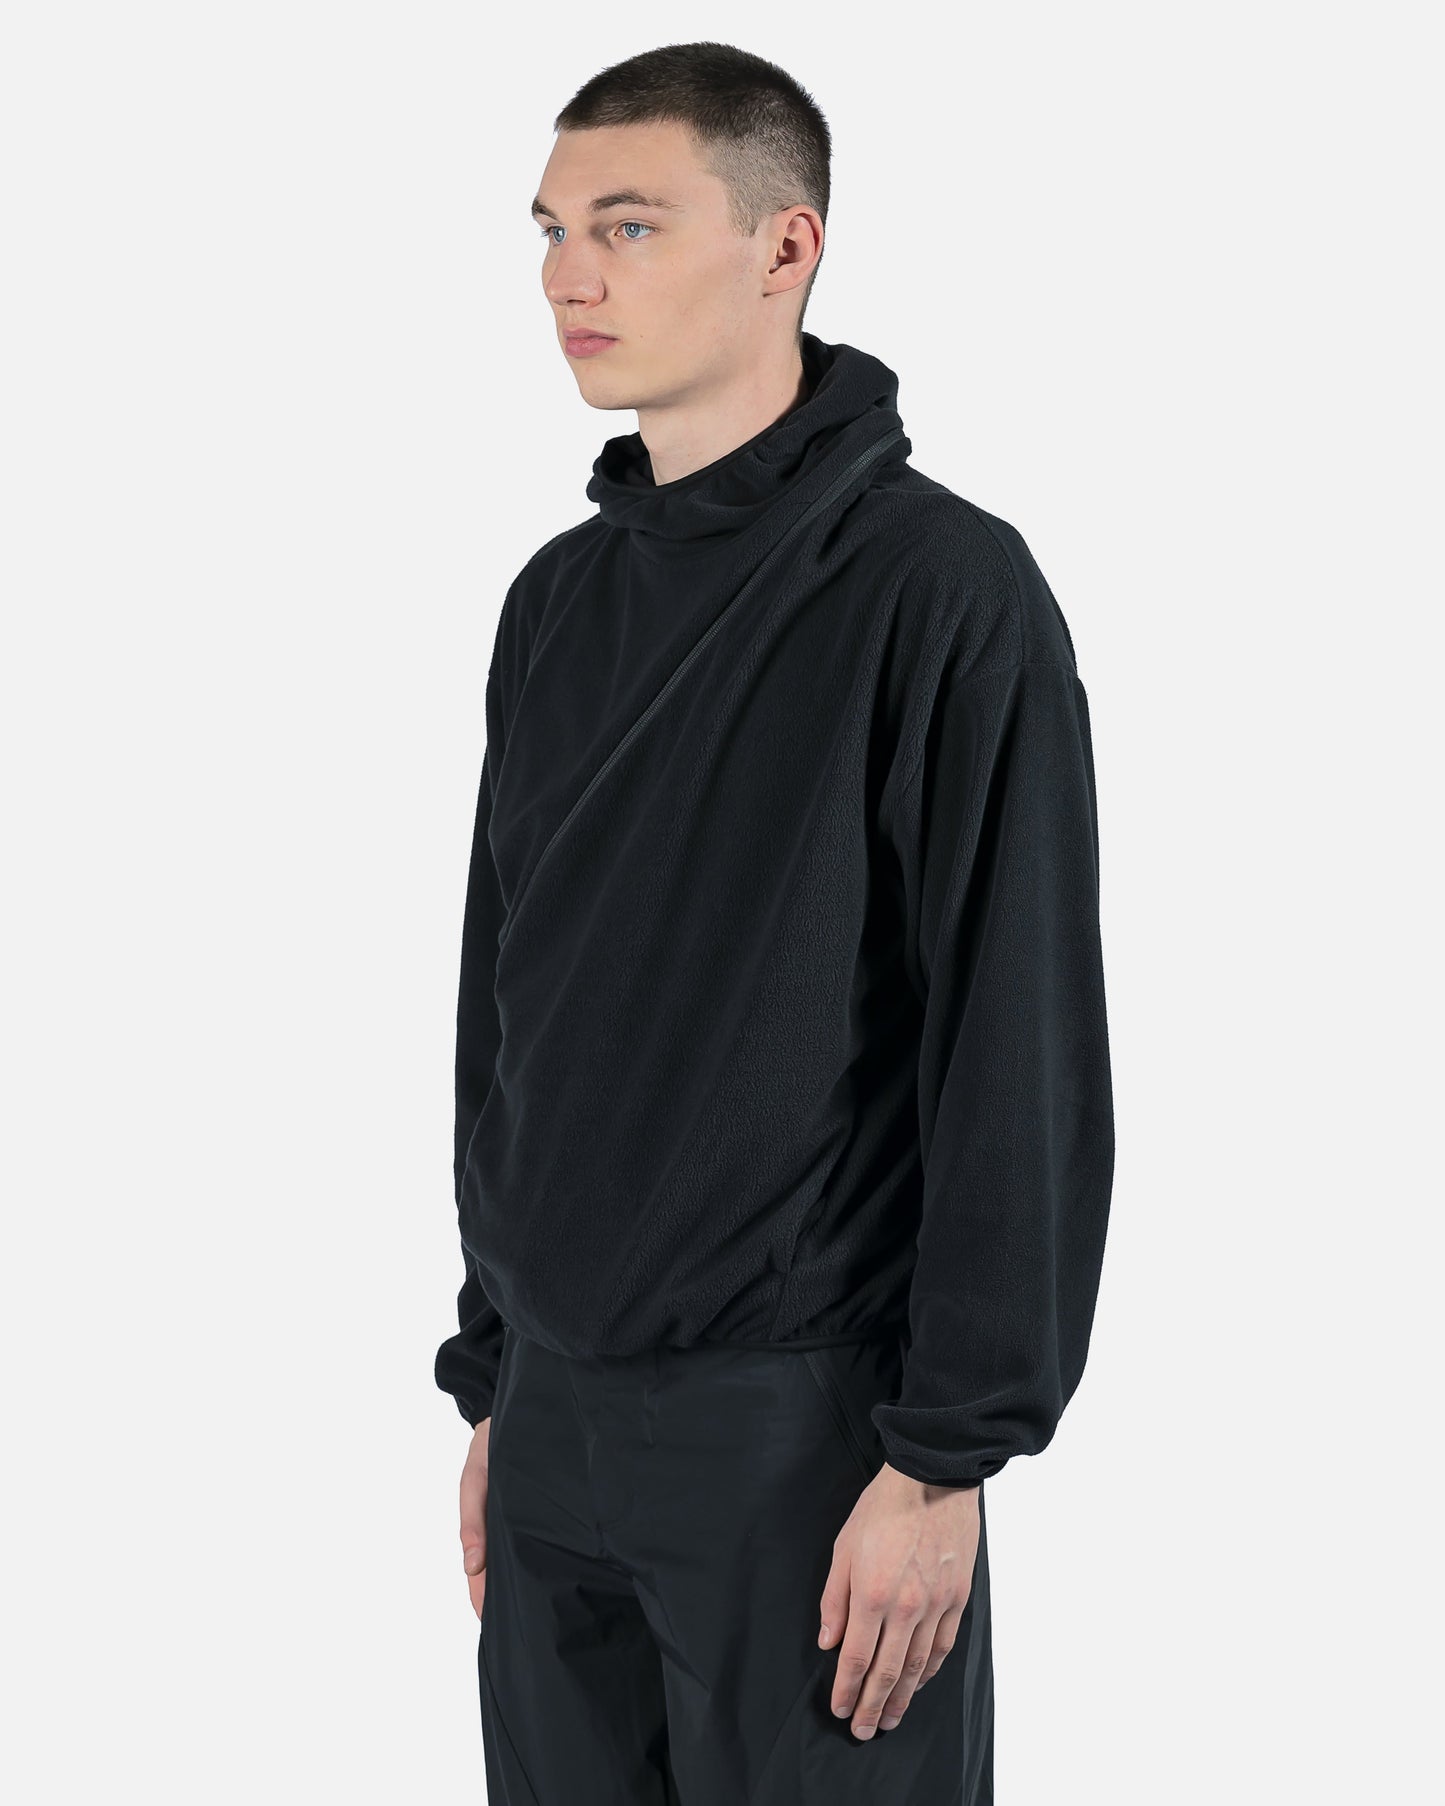 POST ARCHIVE FACTION (P.A.F) Men's Sweatshirts 4.0+ Hoodie Center in Black